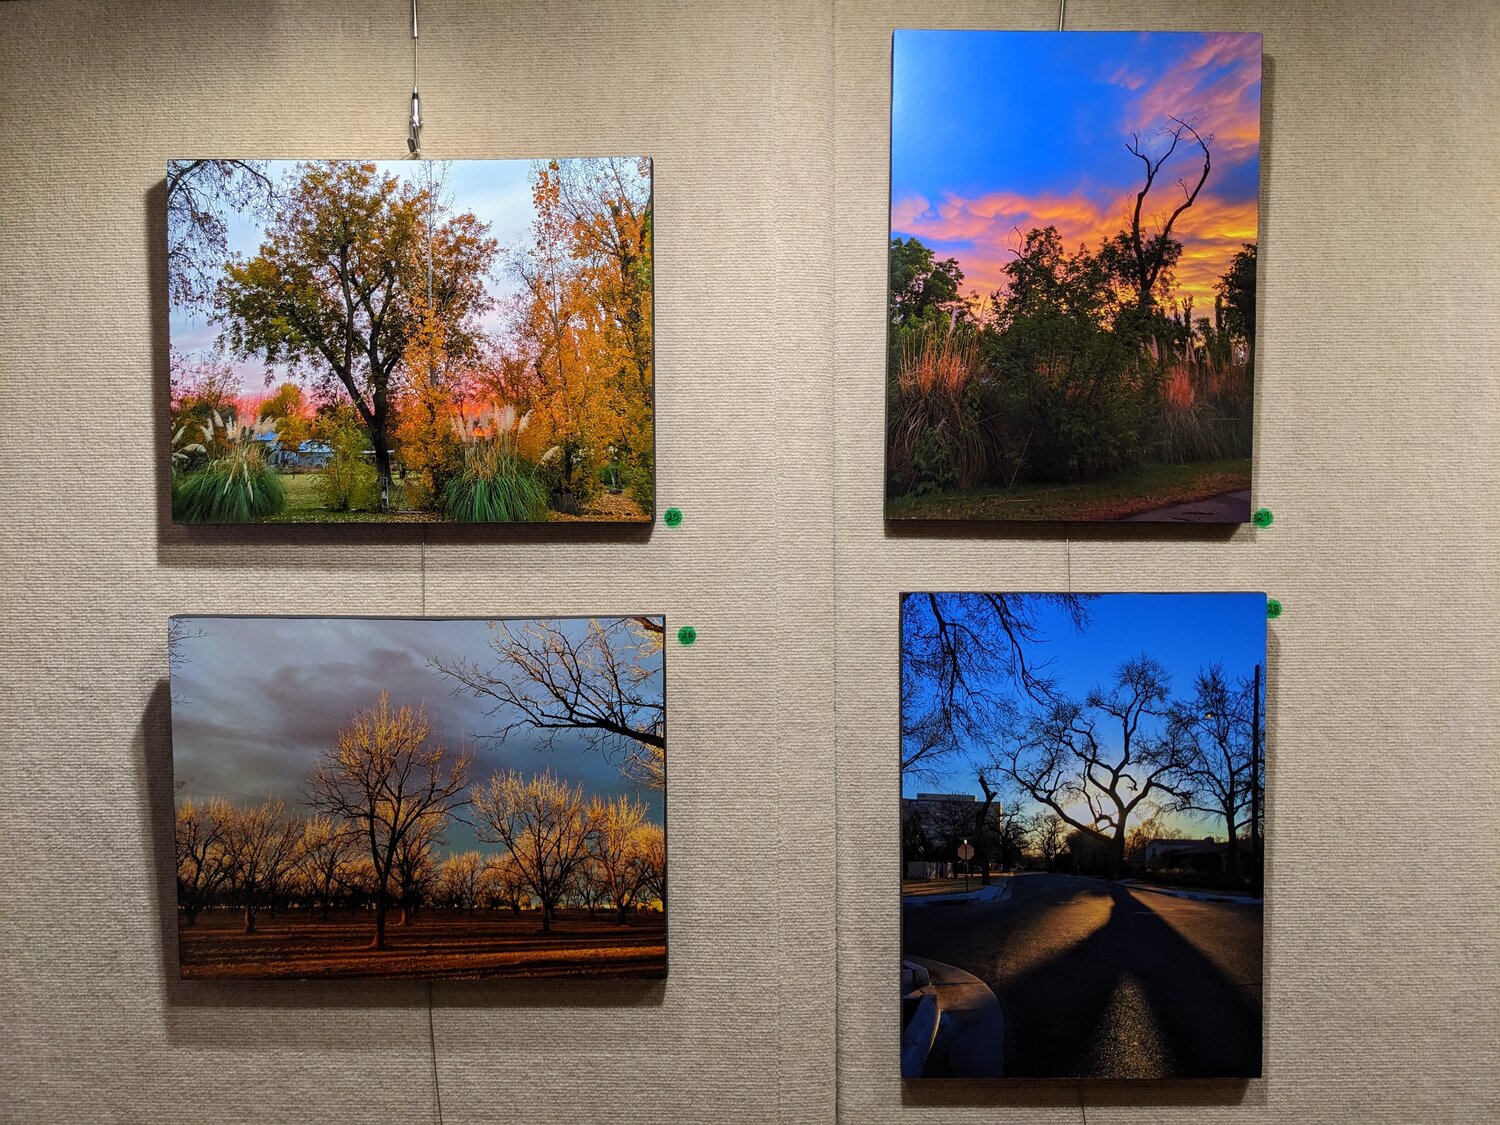 Photos by Rochelle Williams, clockwise from top left: “My Tularosa,” “Snagging Beauty, Tularosa,” “Sunrise, Albuquerque” and “Gold in the Trees.”